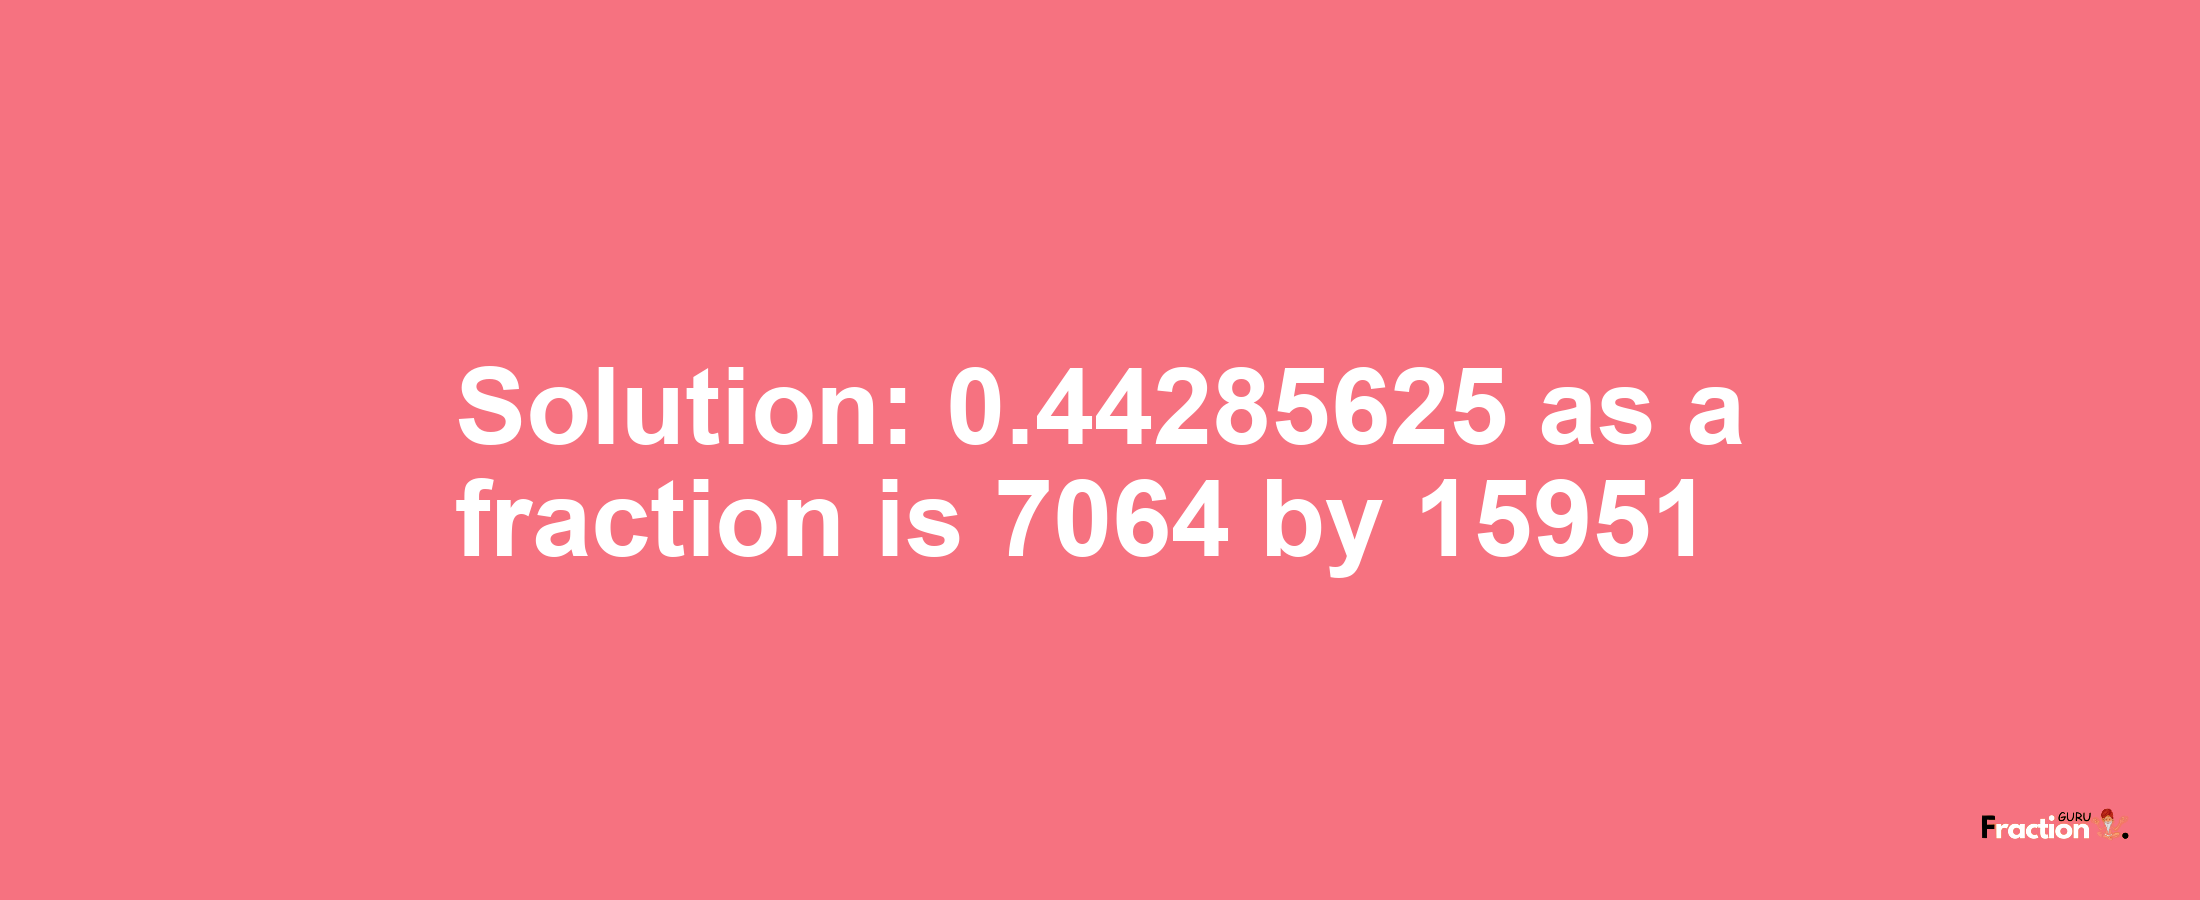 Solution:0.44285625 as a fraction is 7064/15951